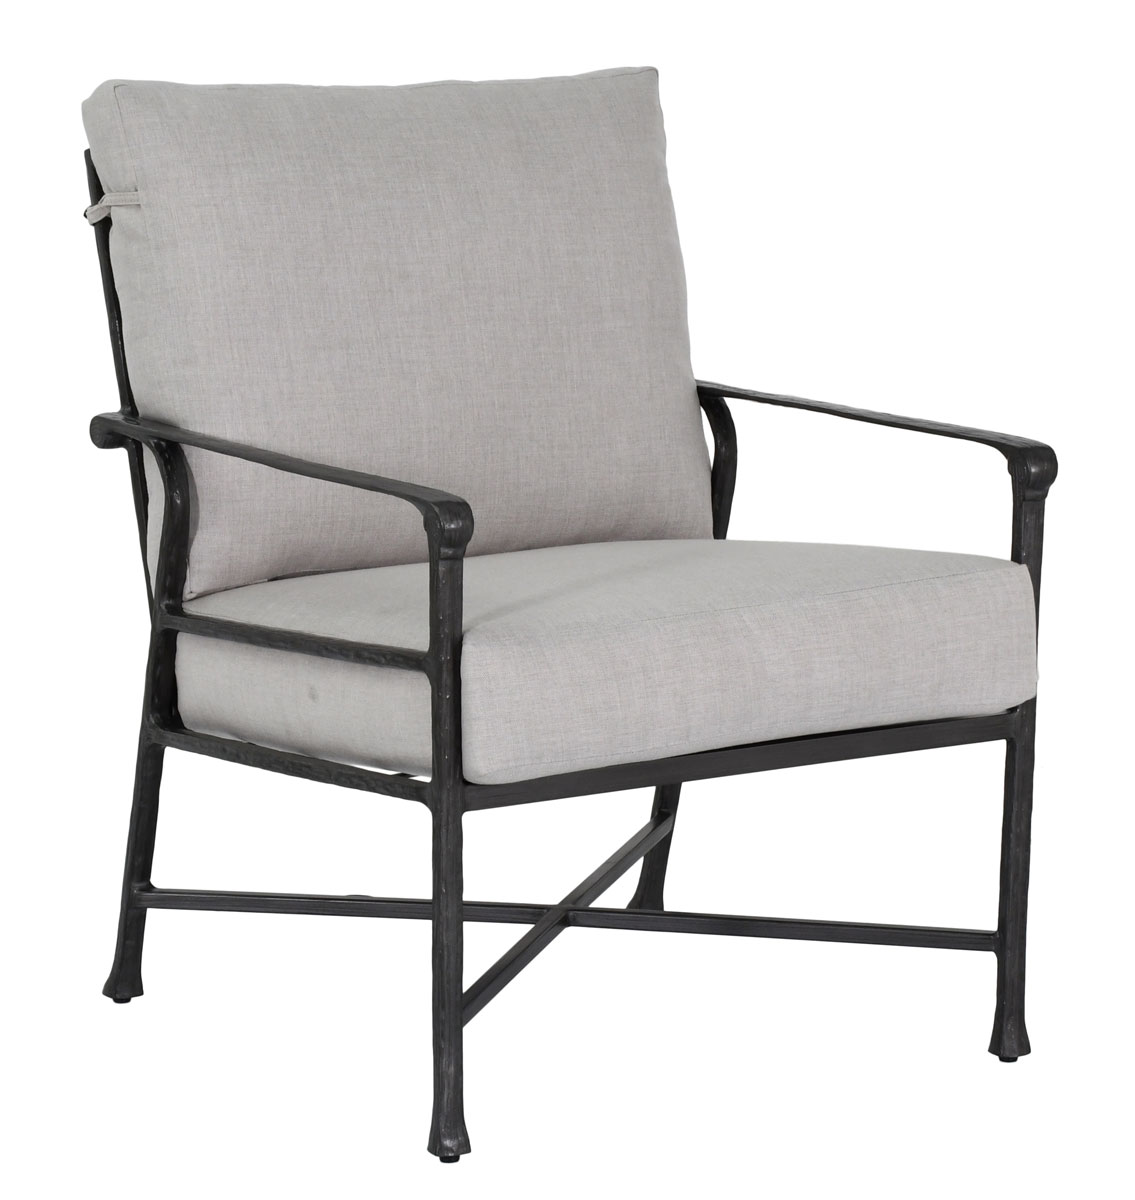 Castelle Marquis Cushioned Lounge Chair